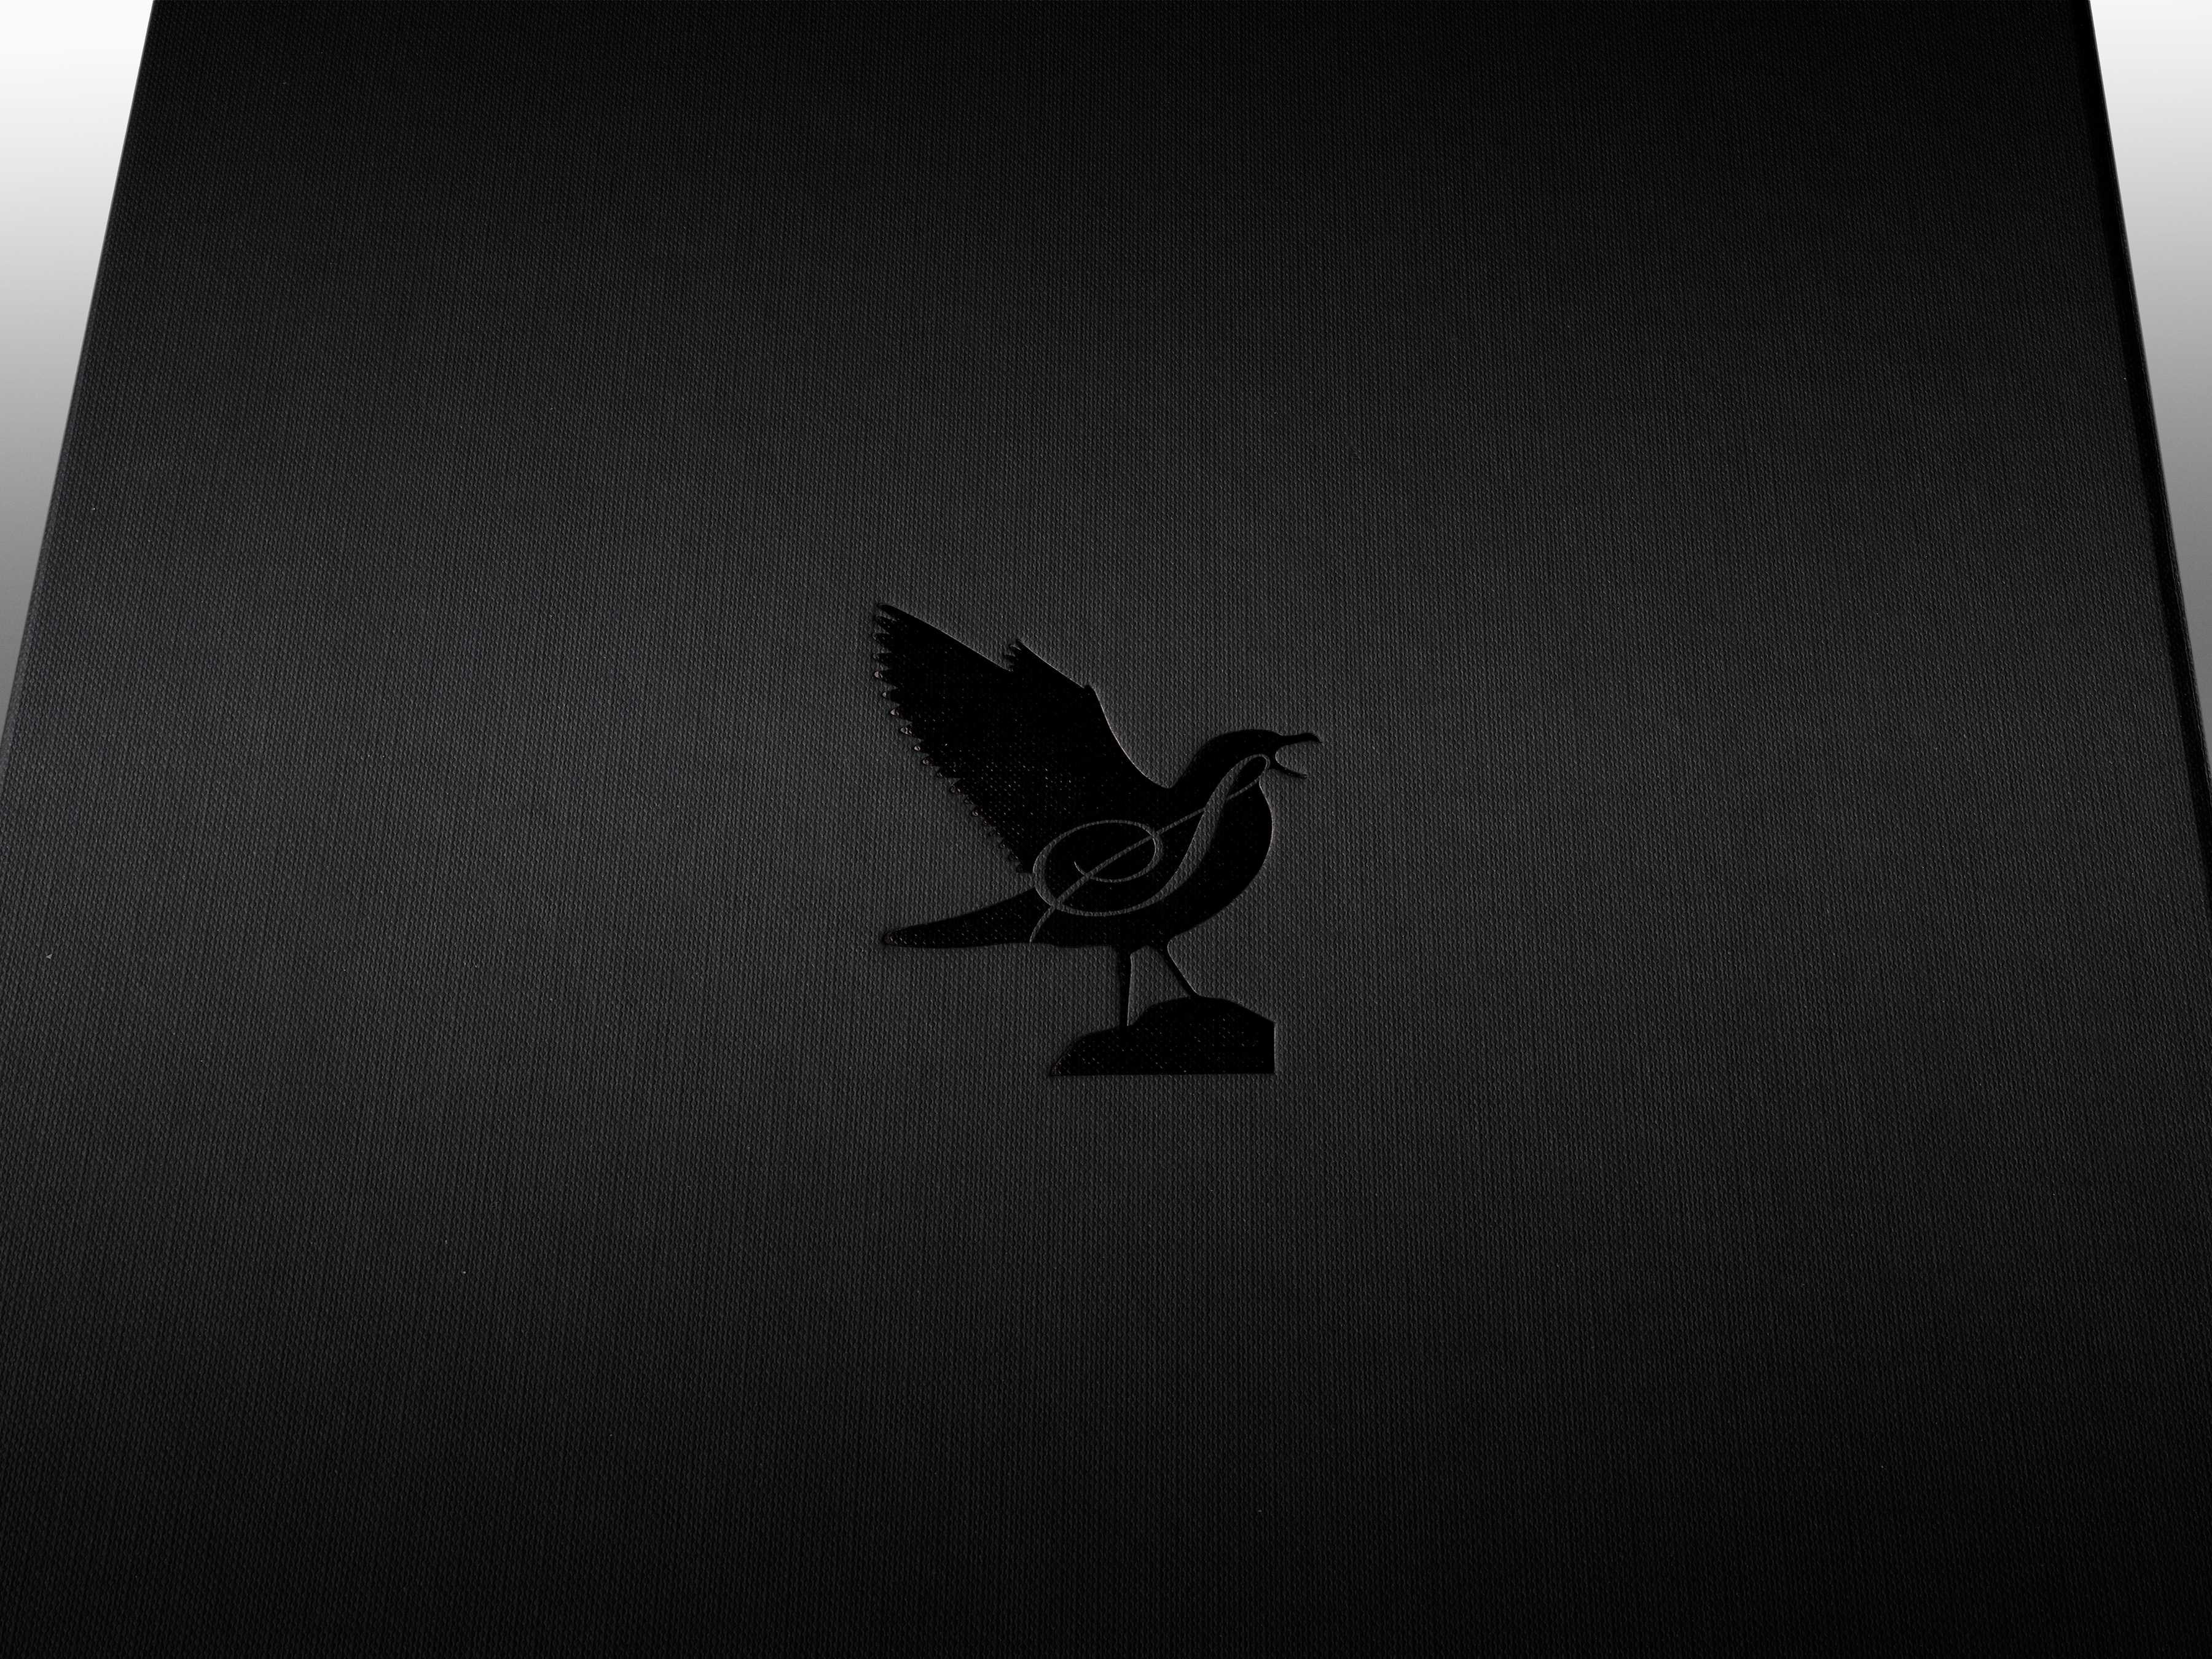 A close-up of the black embossed symbol of a bird with the letter ‘S’ in a script font.